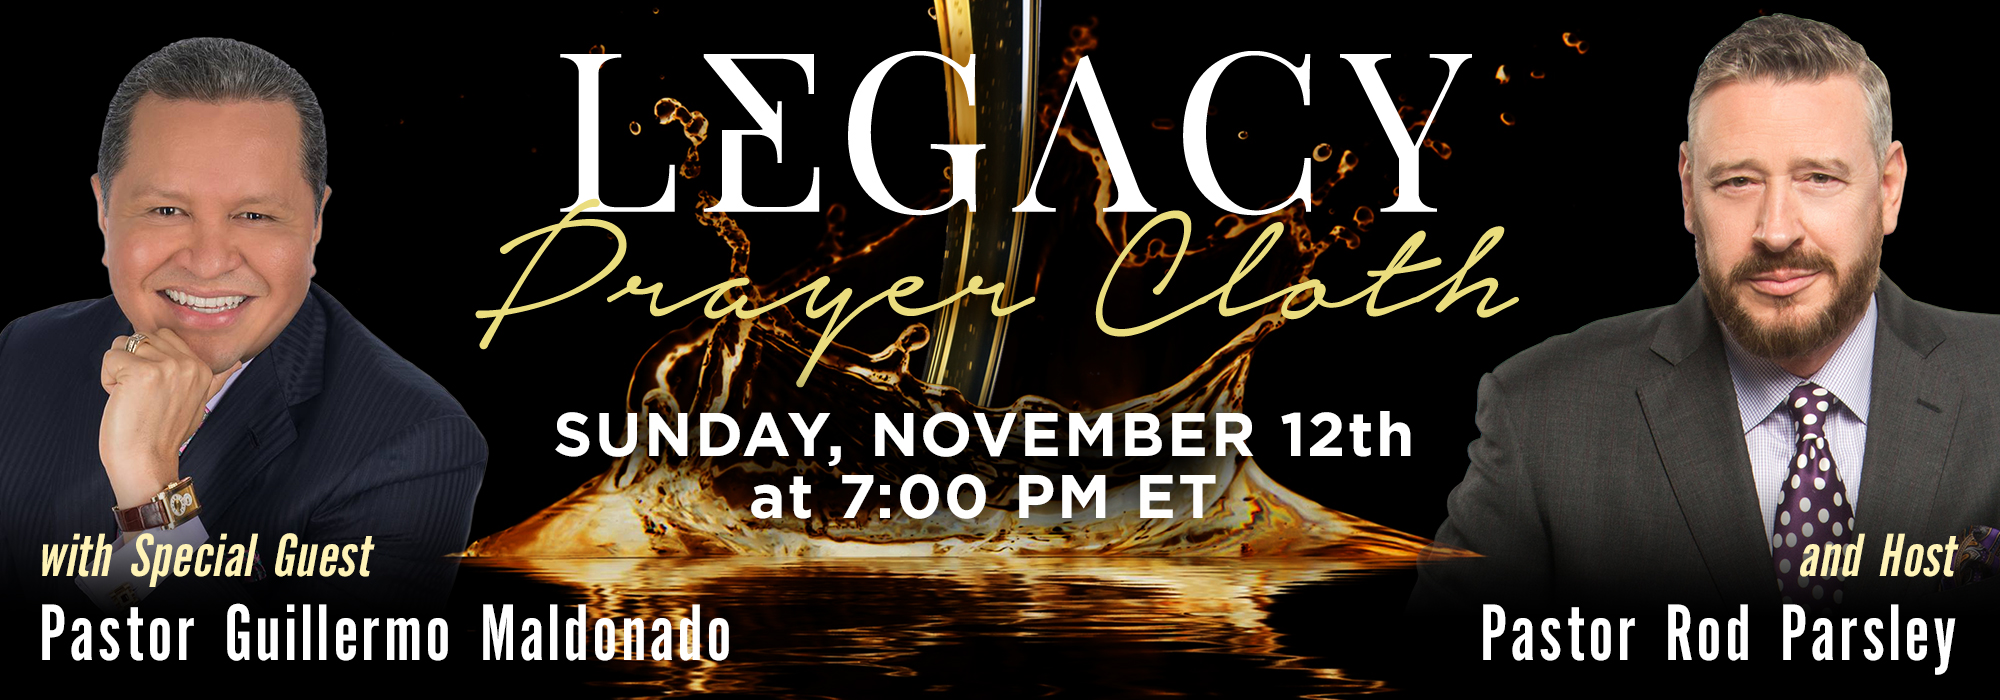 Miracle, Healing & Victory Legacy Prayer Cloth | Sunday, November 12th at 7 PM ET | with Special Guest: Pastor Guillermo Maldonado and Host: Pastor Rod Parsley